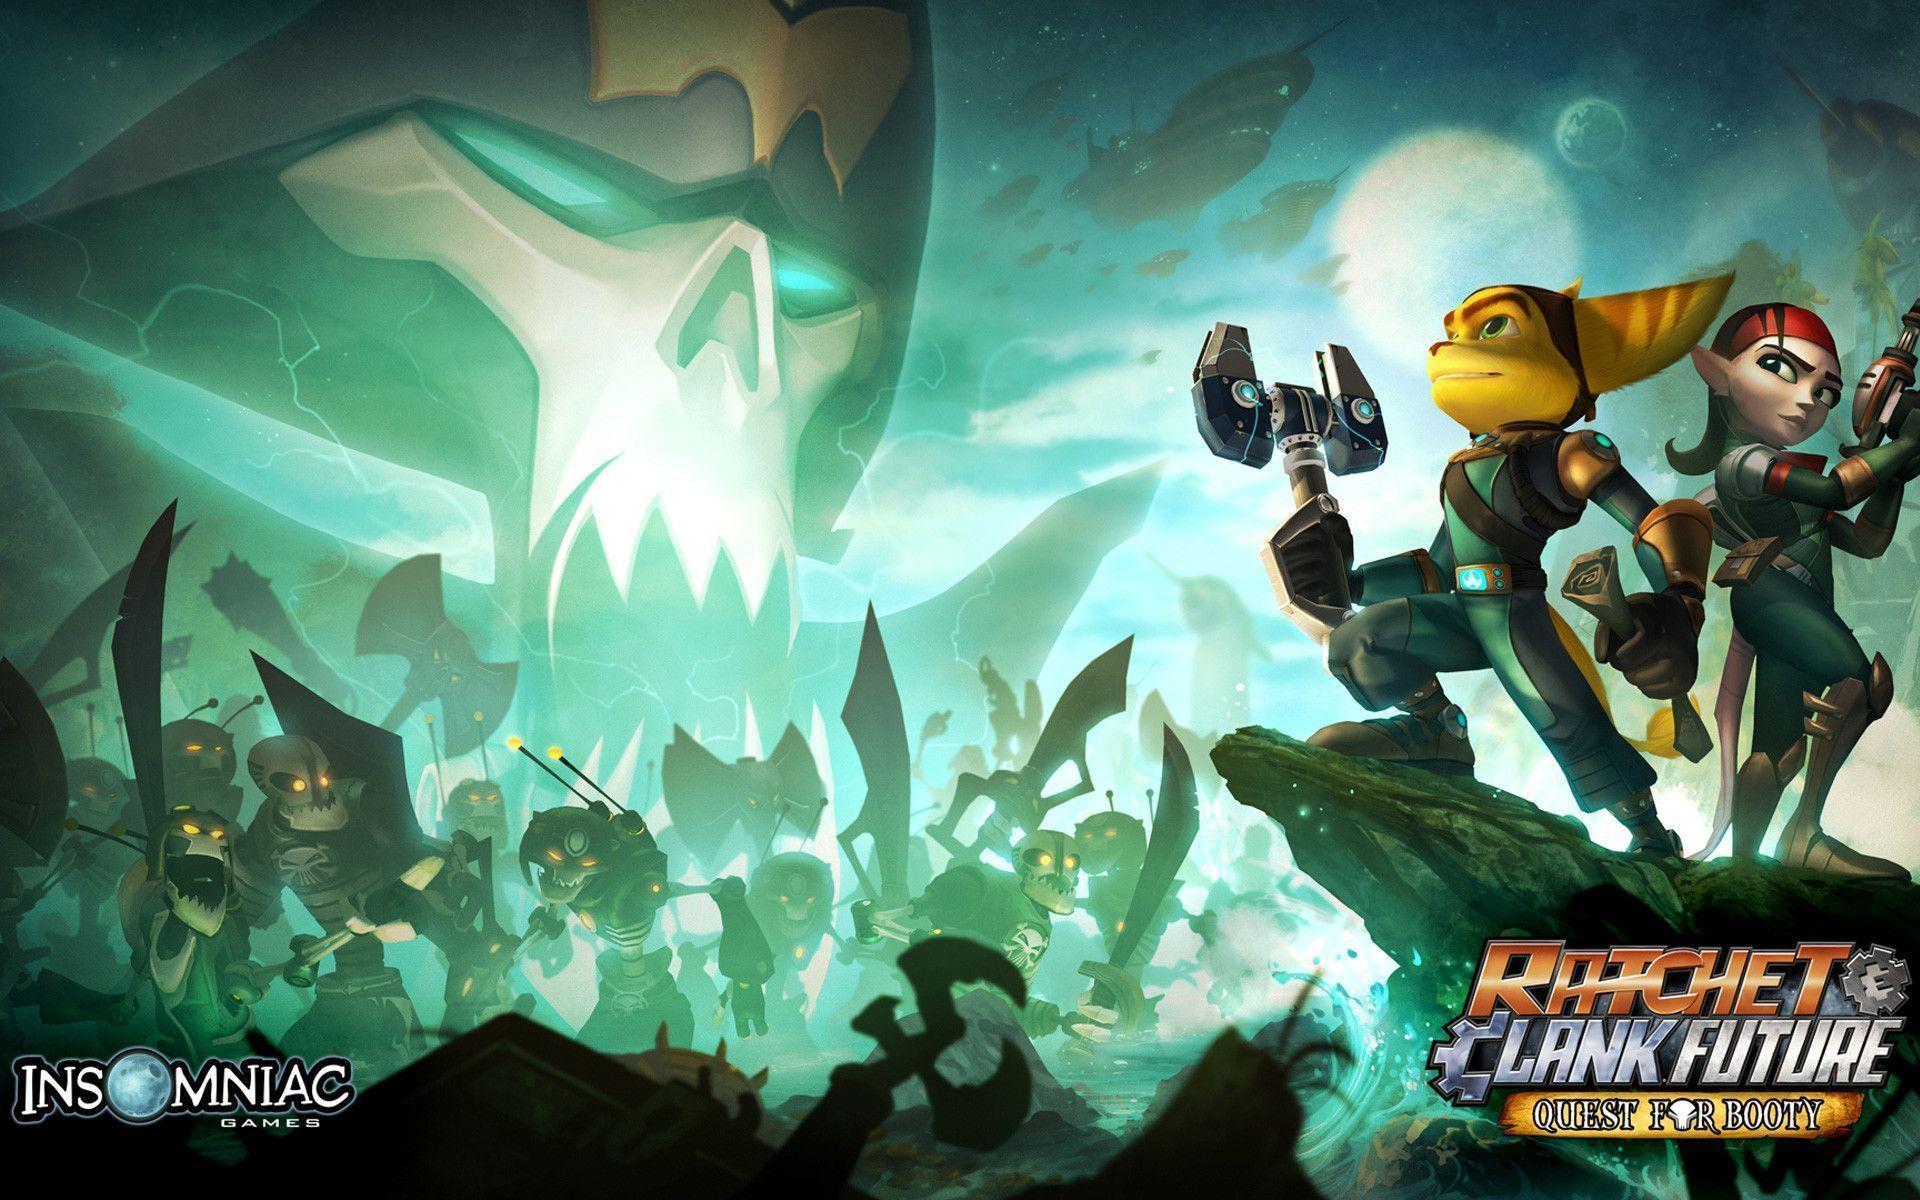 Free Ratchet & Clank Future: Quest for Booty Wallpaper in 1920x1200